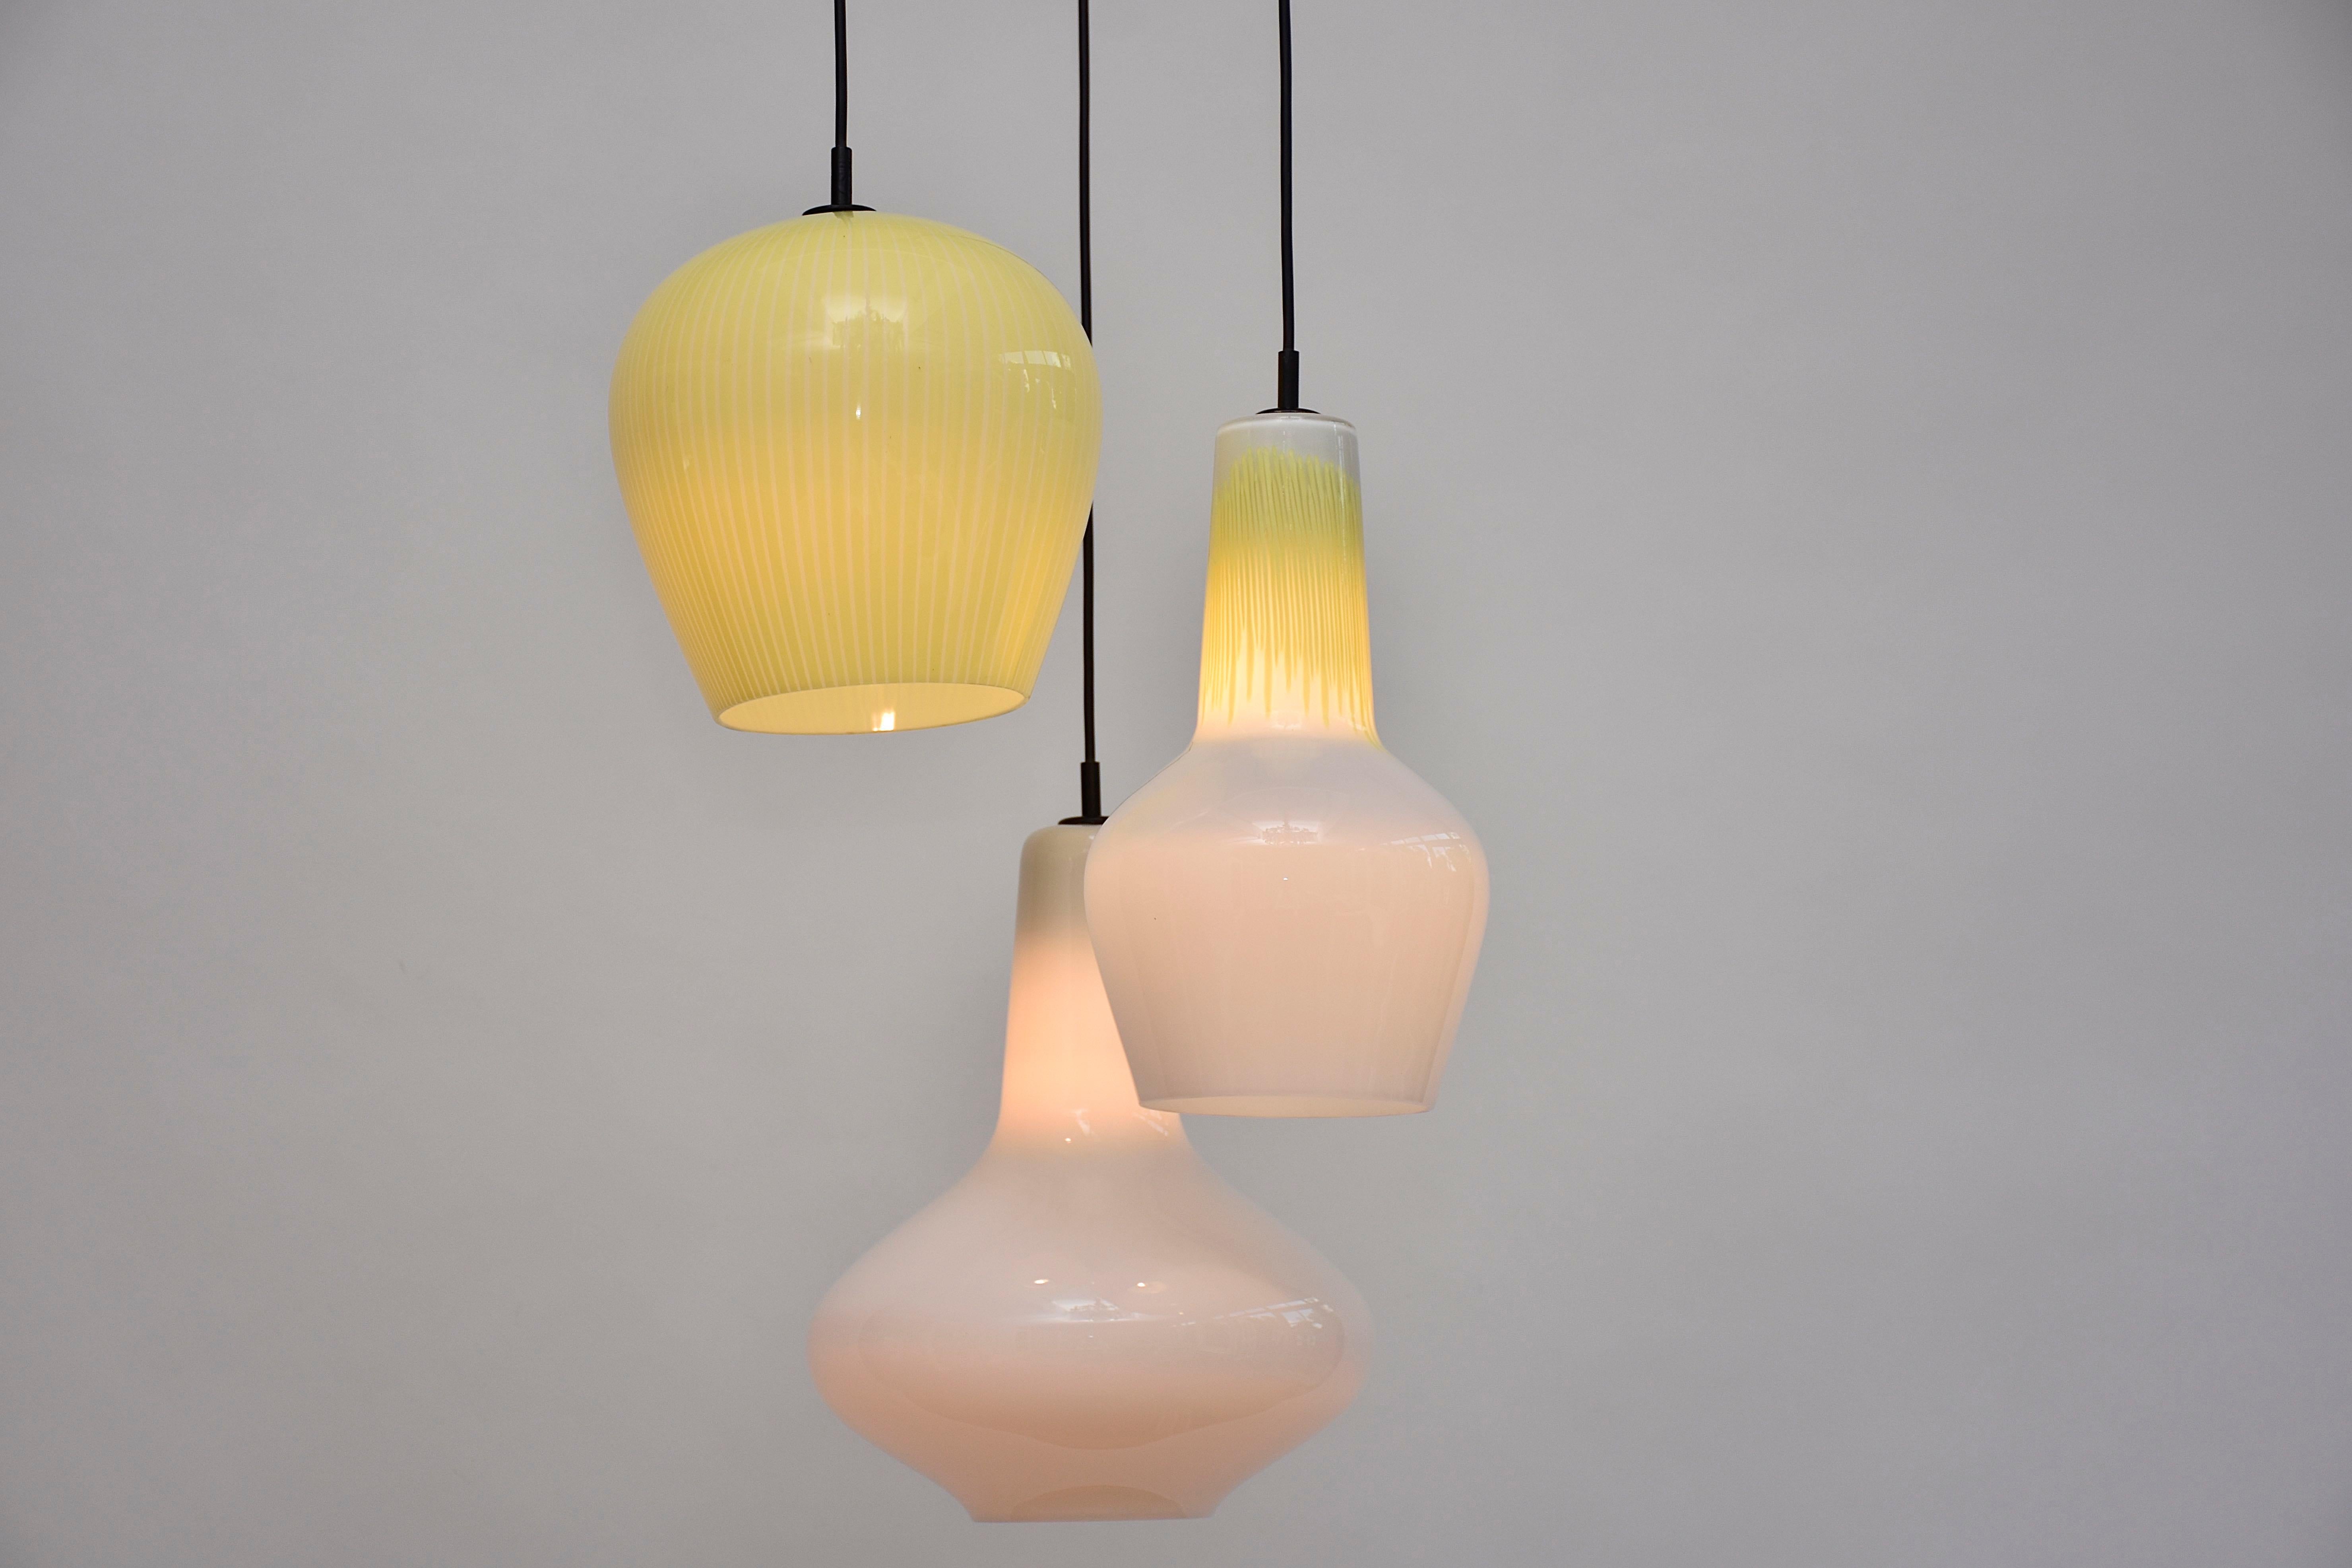 A mid-century original Italian pendant by Massimo Vignelli for Venini Murano.
With 3 hand blown coloured and white Murano glass pendants and polished brass.
The lamp gives a nice diffuse light.

E27 fitting. Suitable for light bulbs/ halogen/